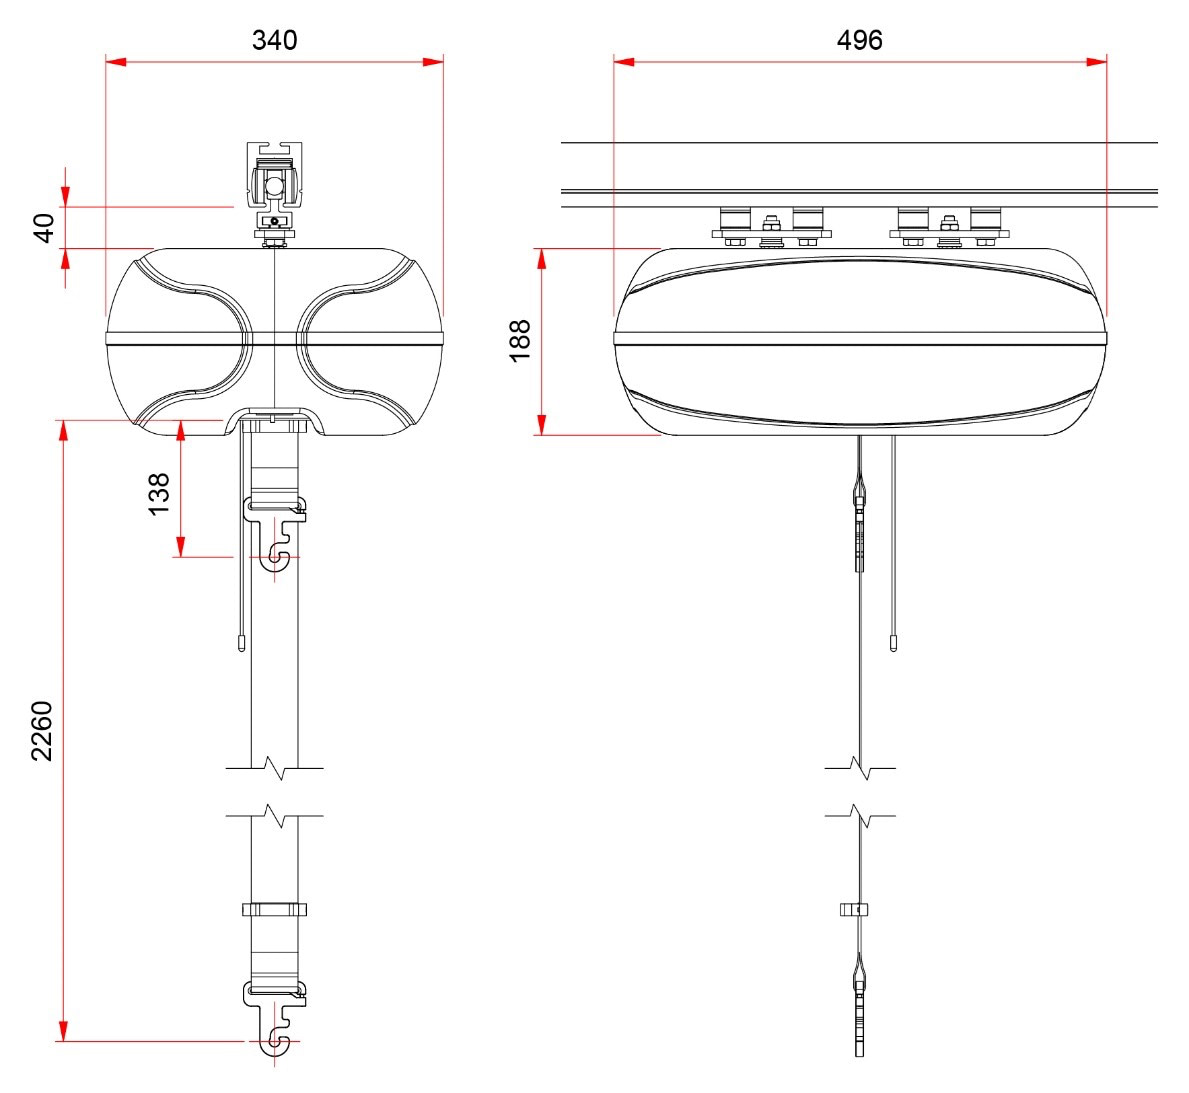 Dimensions of Patient Lifting Solutions AR-500 Ceiling Hoist for bariatric care